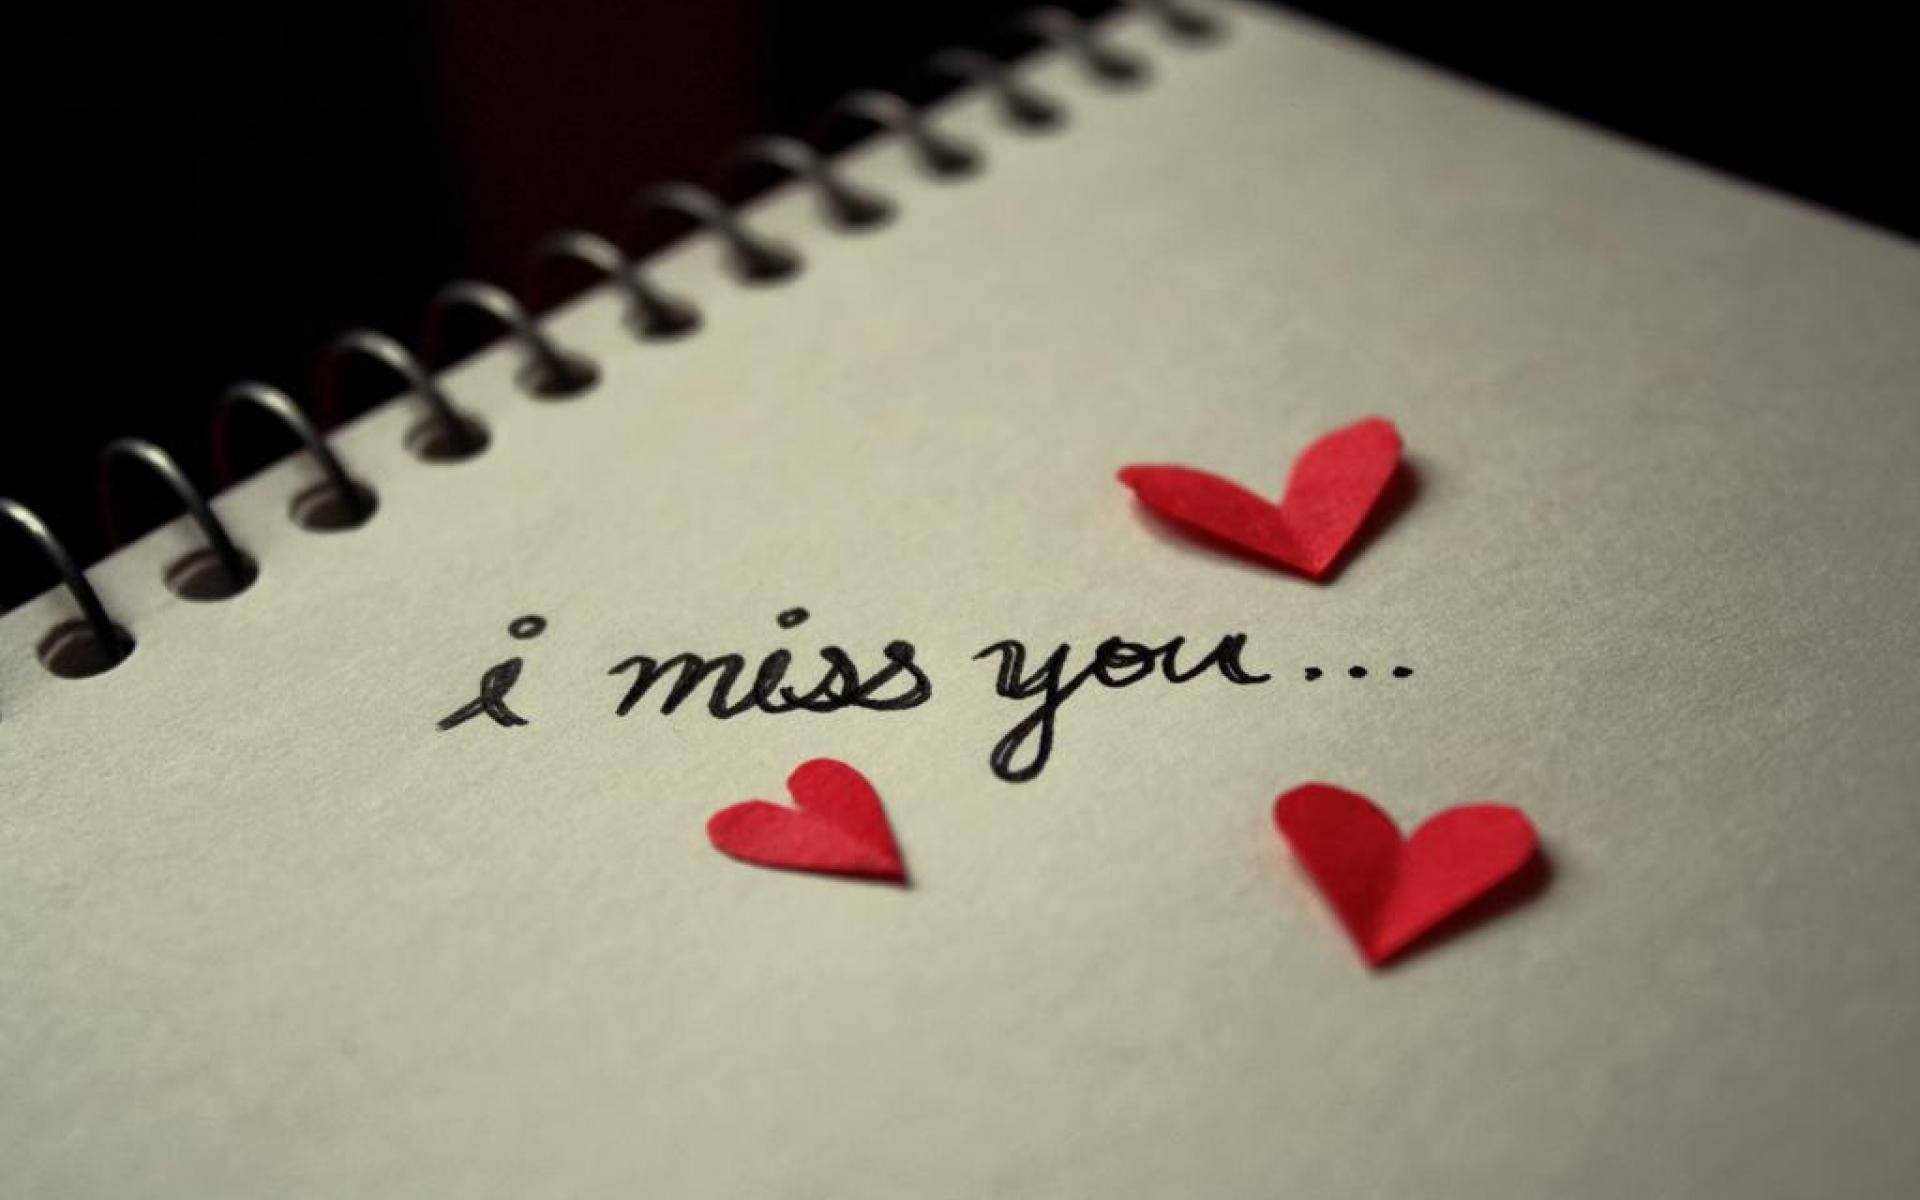 Free I Miss You Wallpaper Downloads, [100+] I Miss You Wallpapers for FREE  